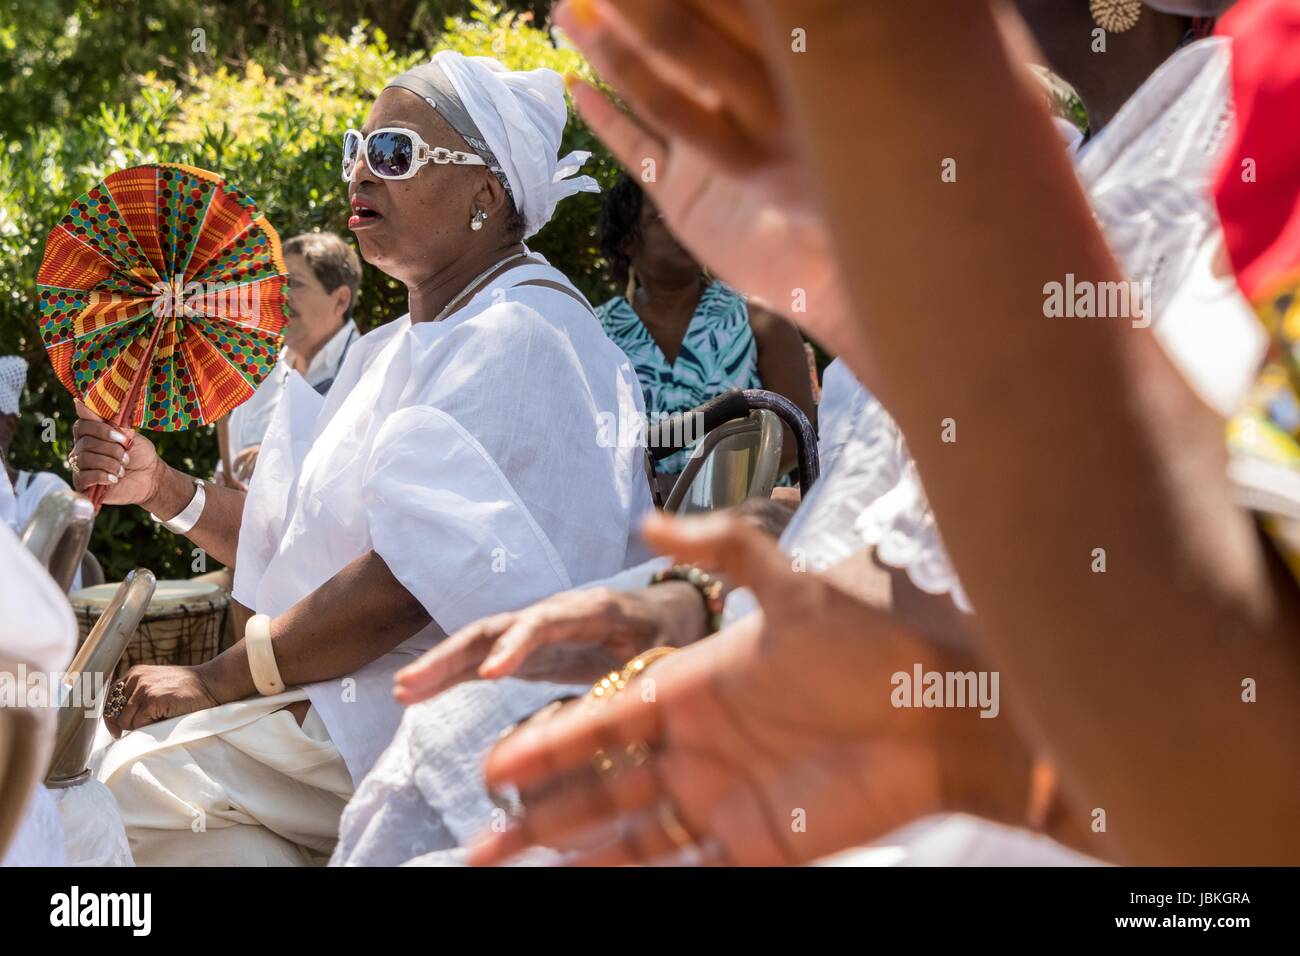 Descendants of enslaved Africans brought to Charleston in the Middle Passage sing praise songs during a remembrance ceremony at Fort Moutrie National Monument June 10, 2017 in Sullivan's Island, South Carolina. The Middle Passage refers to the triangular trade in which millions of Africans were shipped to the New World as part of the Atlantic slave trade. An estimated 15% of the Africans died at sea and considerably more in the process of capturing and transporting. The total number of African deaths directly attributable to the Middle Passage voyage is estimated at up to two million. Stock Photo